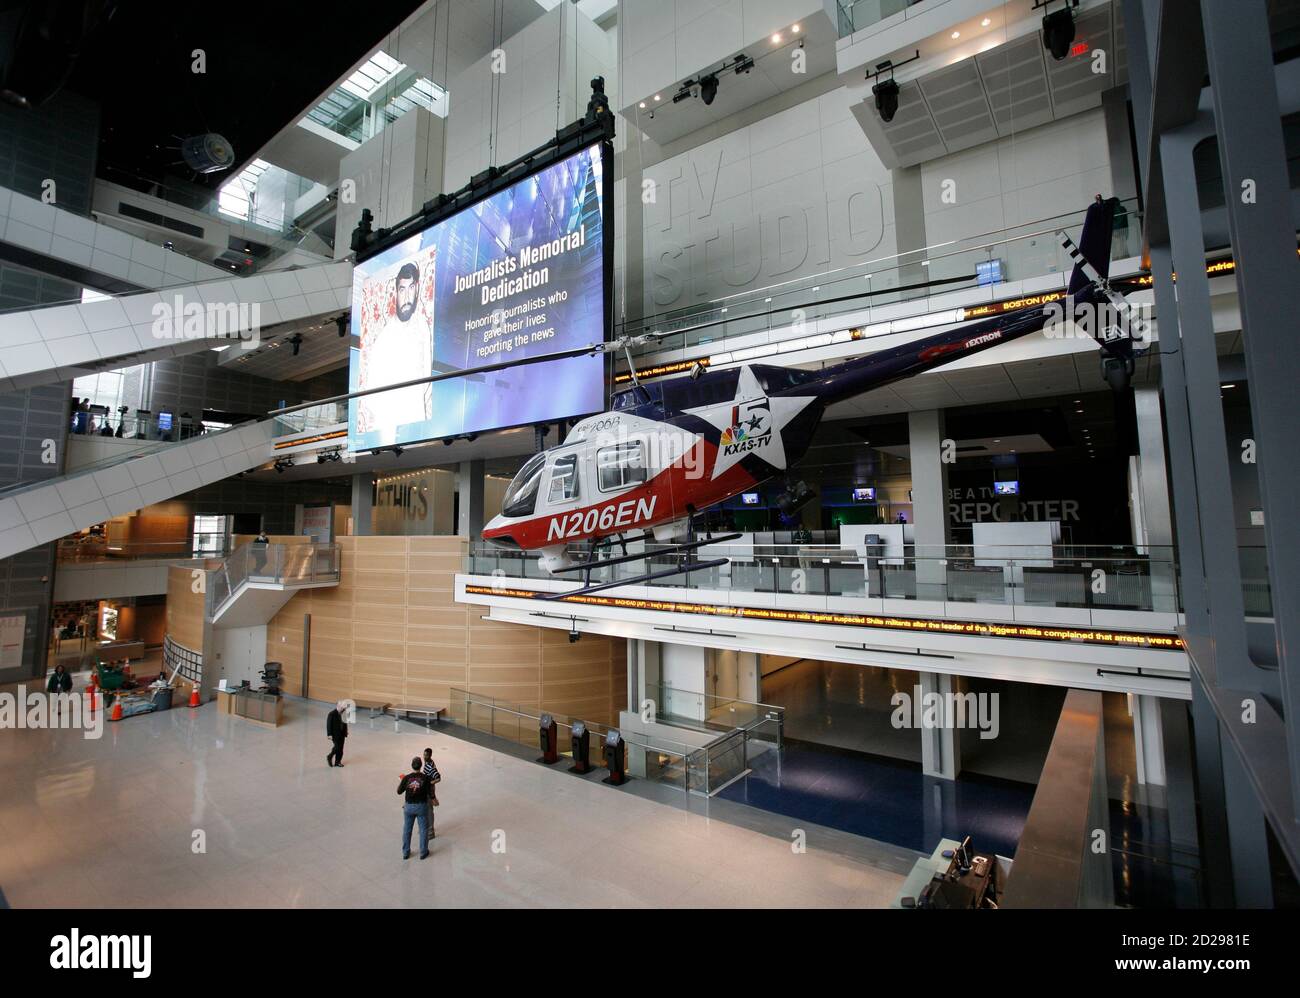 A Bell news helicopter hangs in the atrium of the Newseum, a five-storey building dedicated to the history of news gathering, on Pennsylvania Avenue in northwest Washington April 4, 2008. The $450 million Newseum, which opens to the public on April 11, features 14 high-tech interactive exhibits exploring news history, electronic news, photojournalism, coverage of the September 11, 2001 attacks and a memorial to the over 1,800 journalists from around the world who died or were killed in the pursuit of news globally over the decades. REUTERS/Jason Reed (UNITED STATES) Stock Photo